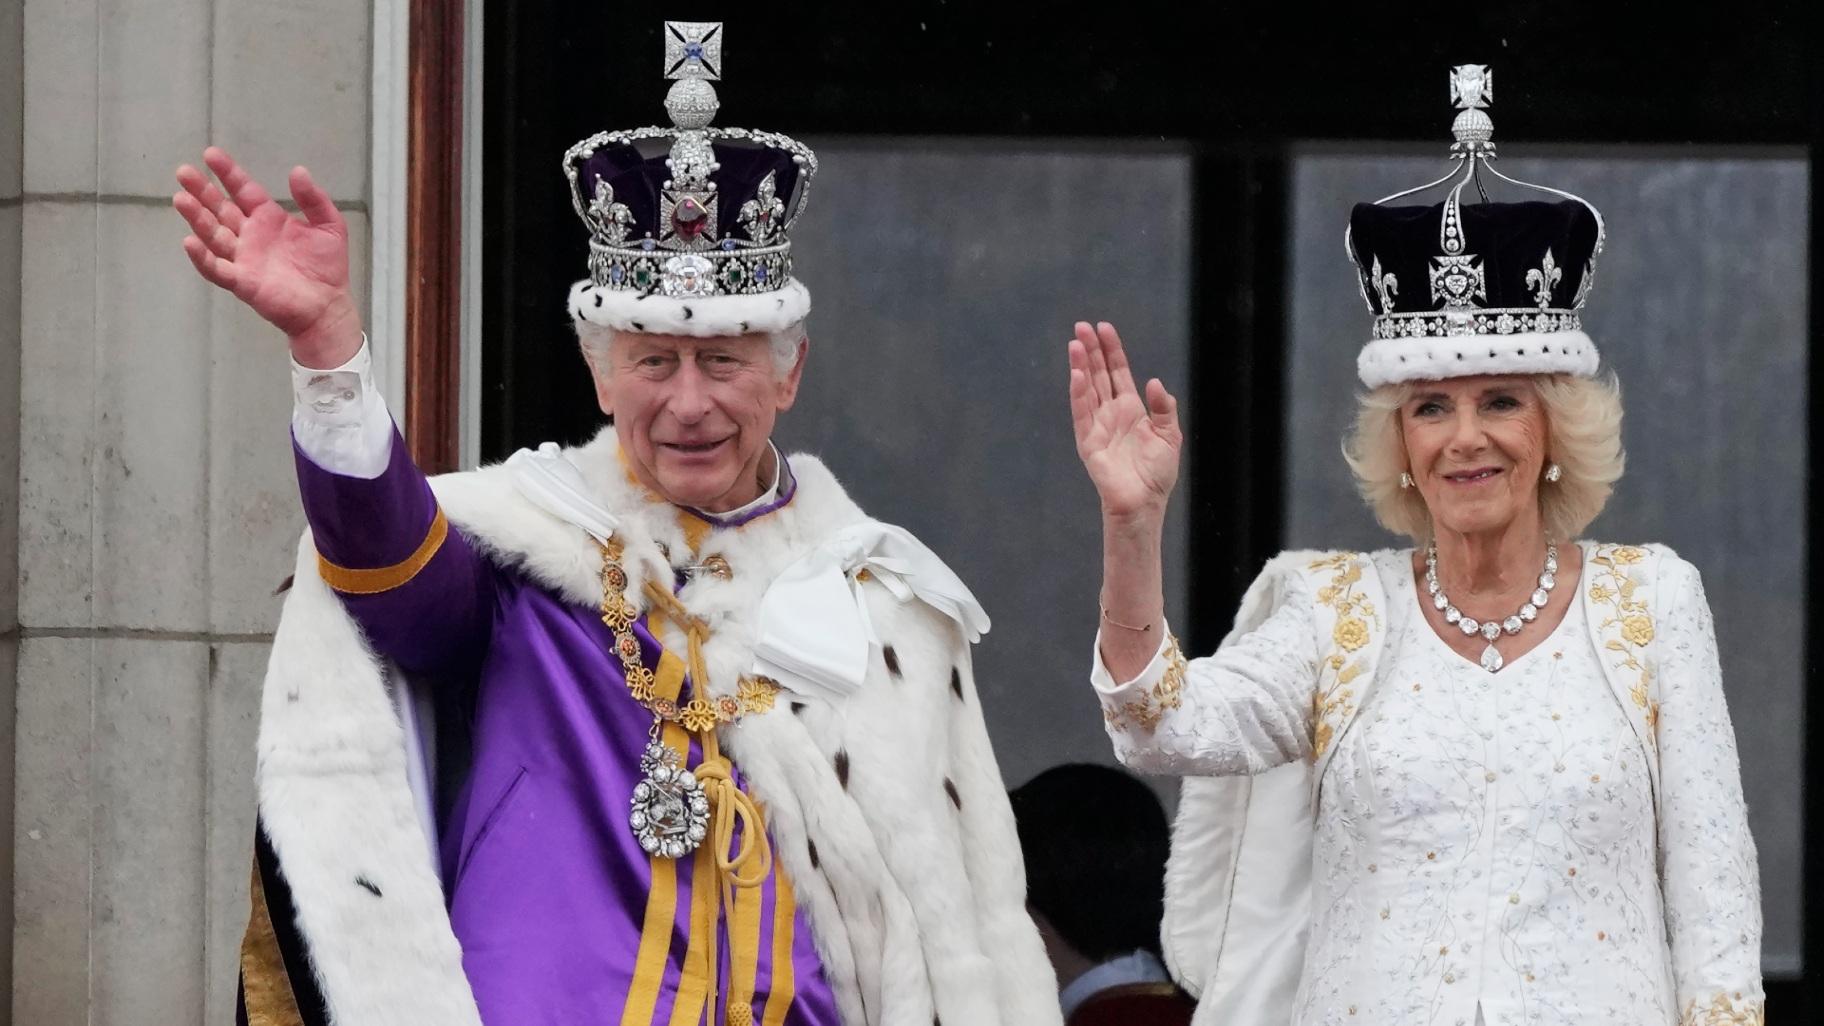 King Charles III Announced As New Title for Prince Charles, With Camilla As  Queen Consort